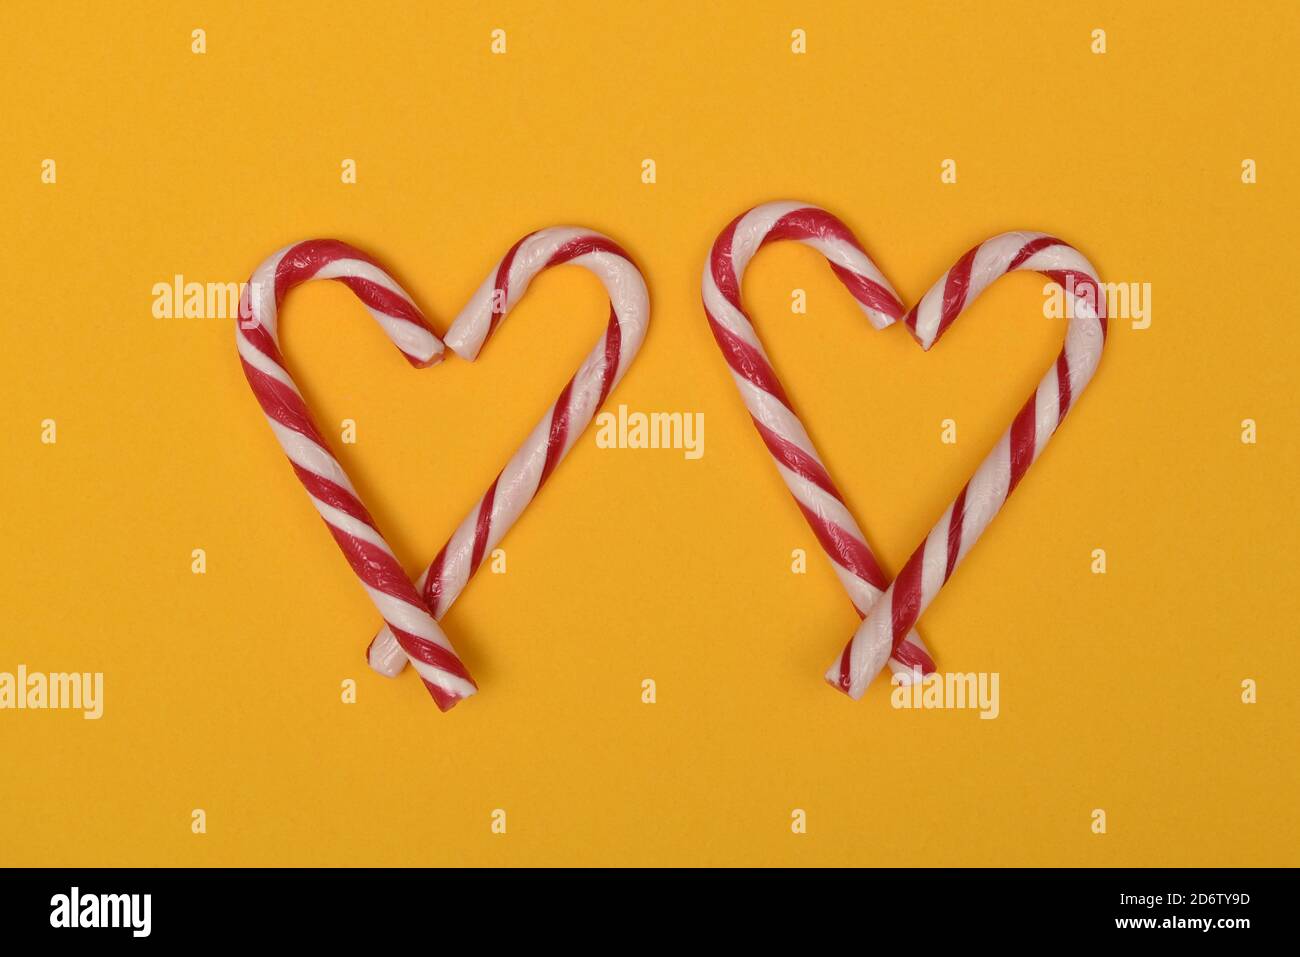 photograph of two candy canes shaped as hearts on a red background Stock Photo